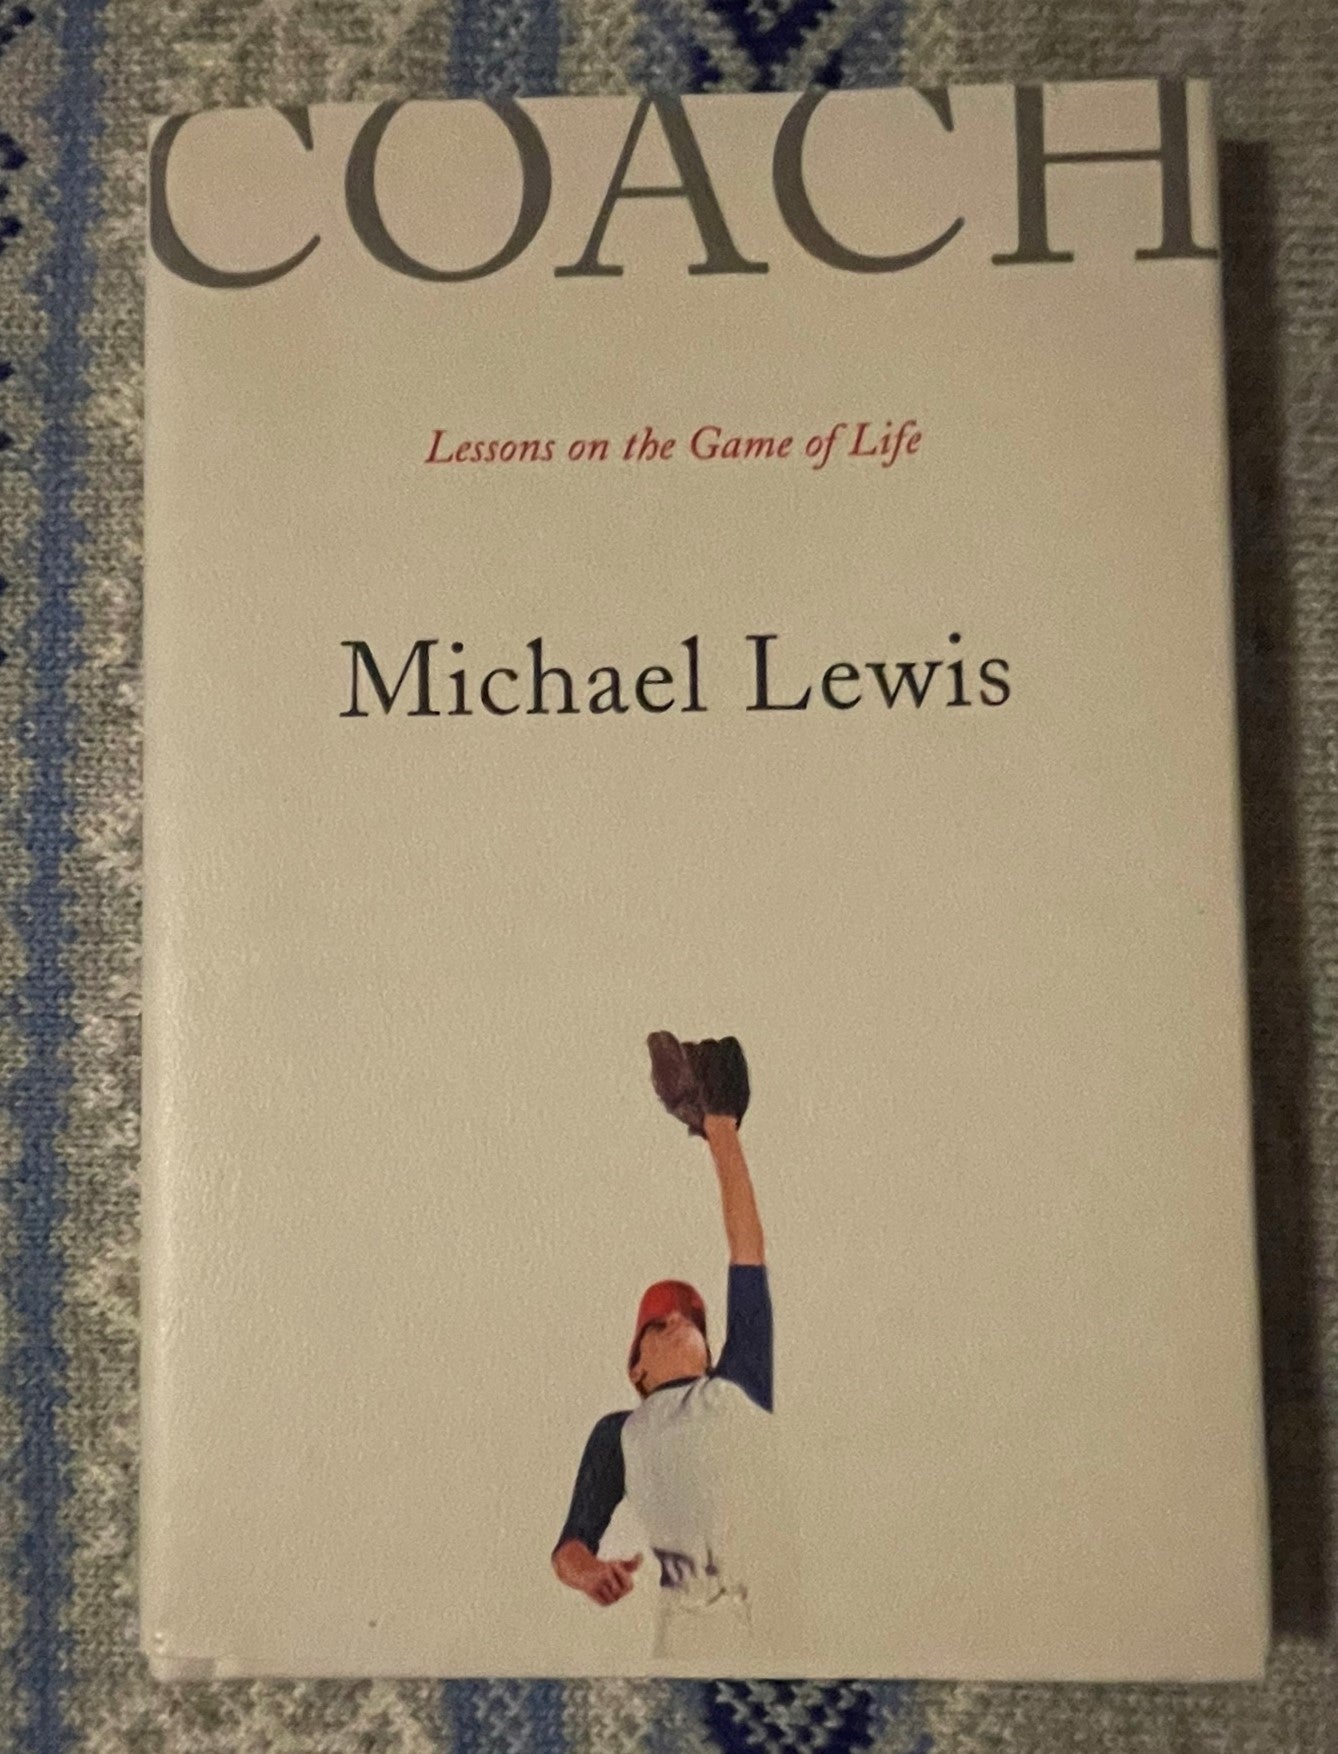 Lewis, Michael: Coach - Lessons on the Game of Life (2005)